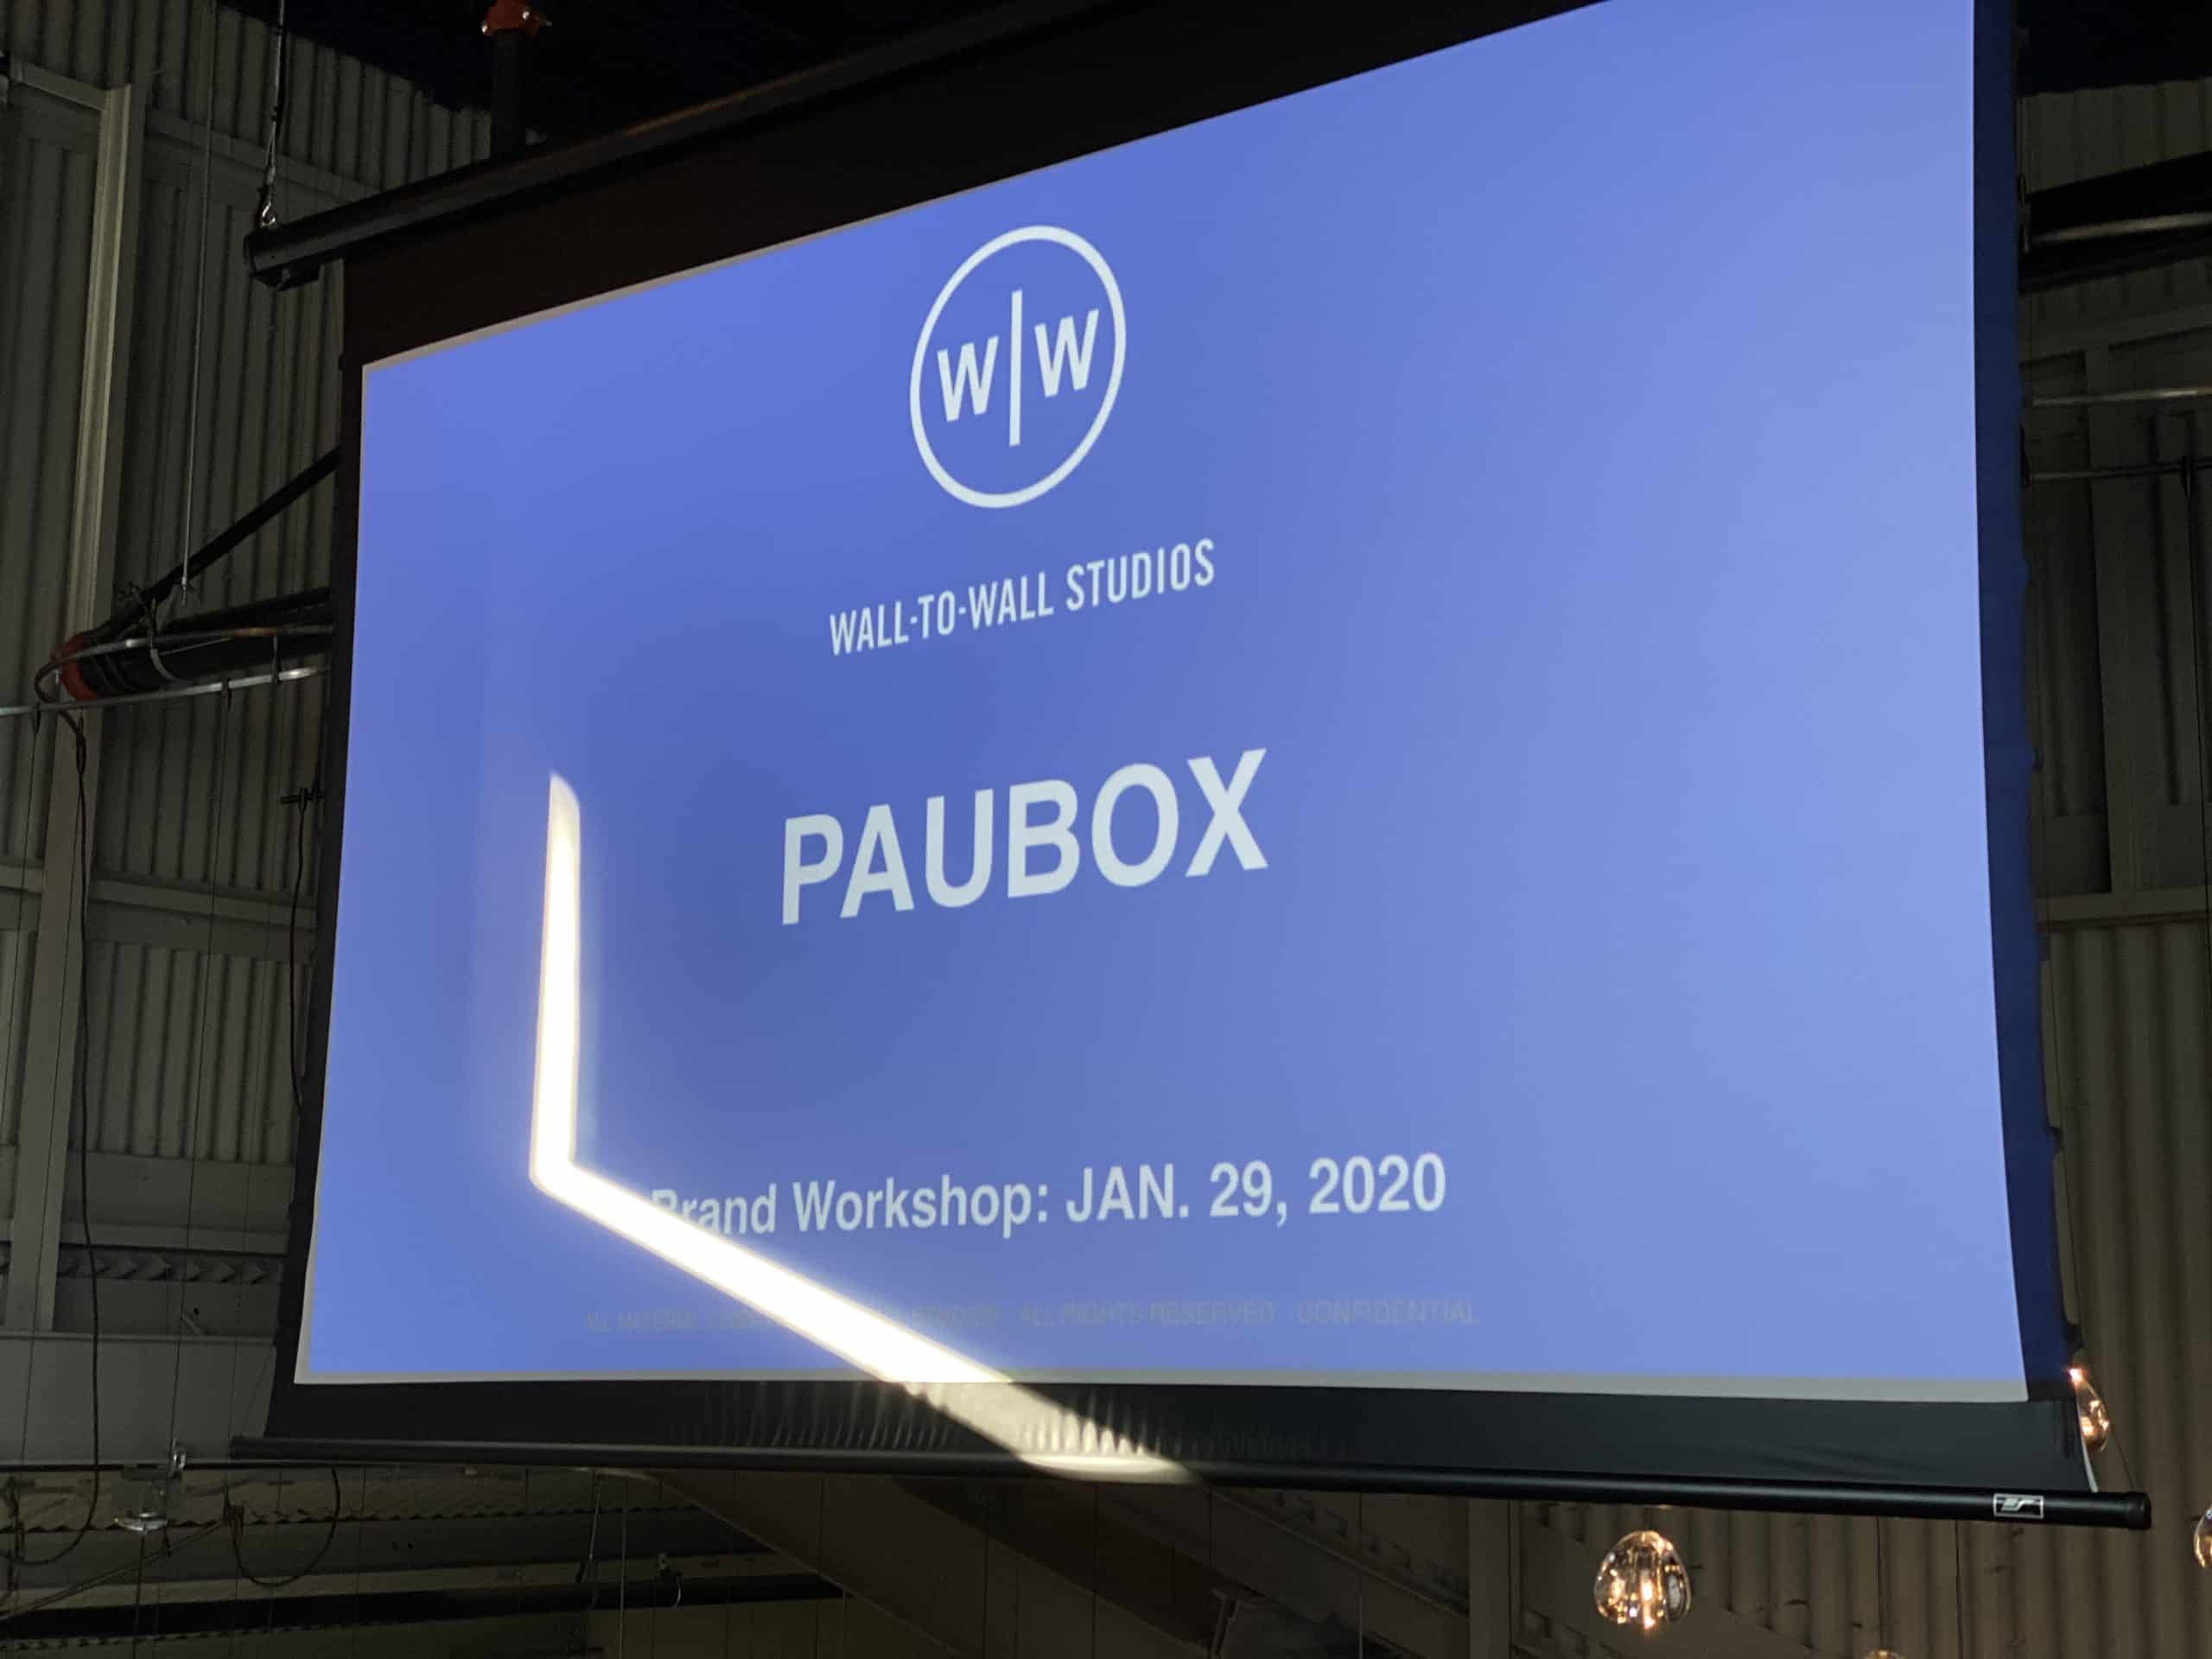 Project Orca renamed to Paubox Marketing